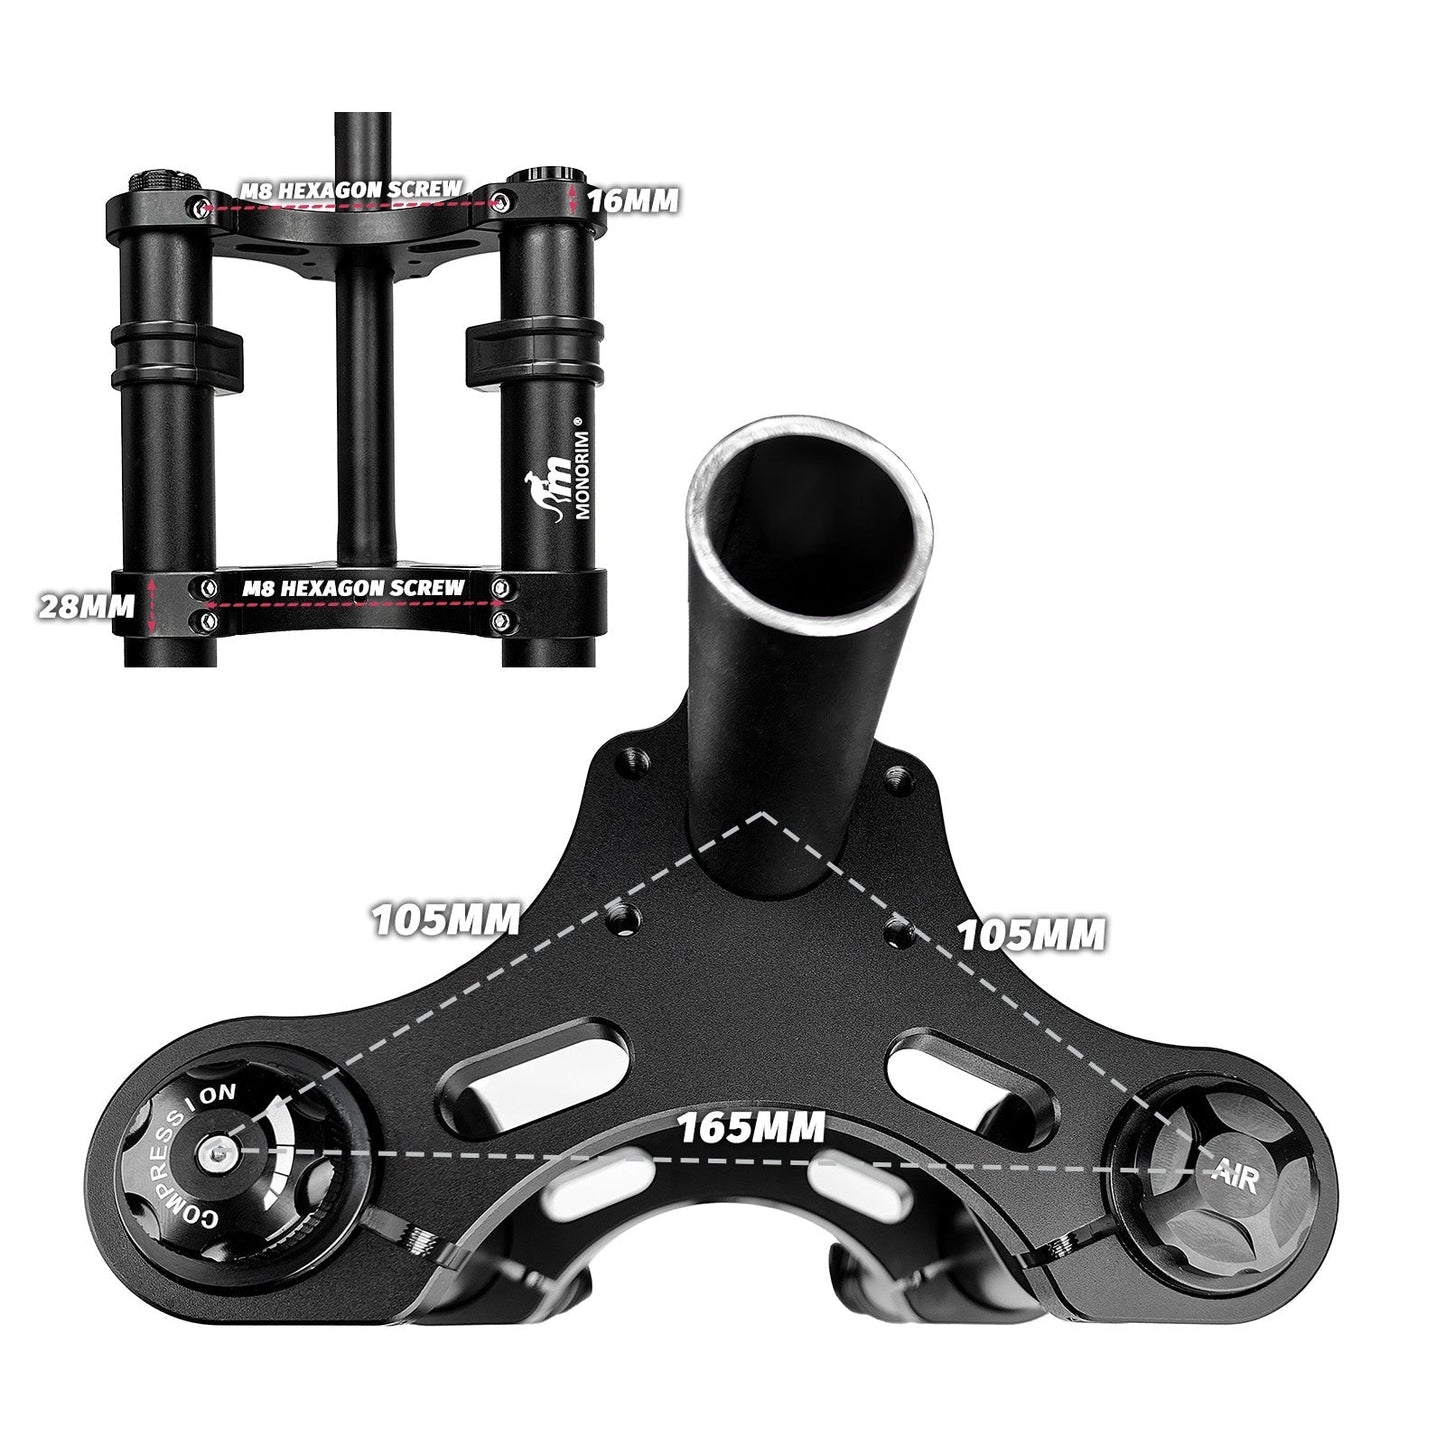 Monorim MD0-14inch front suspension modify great kit to be more safety and comfort for Ado A16 ebike ：